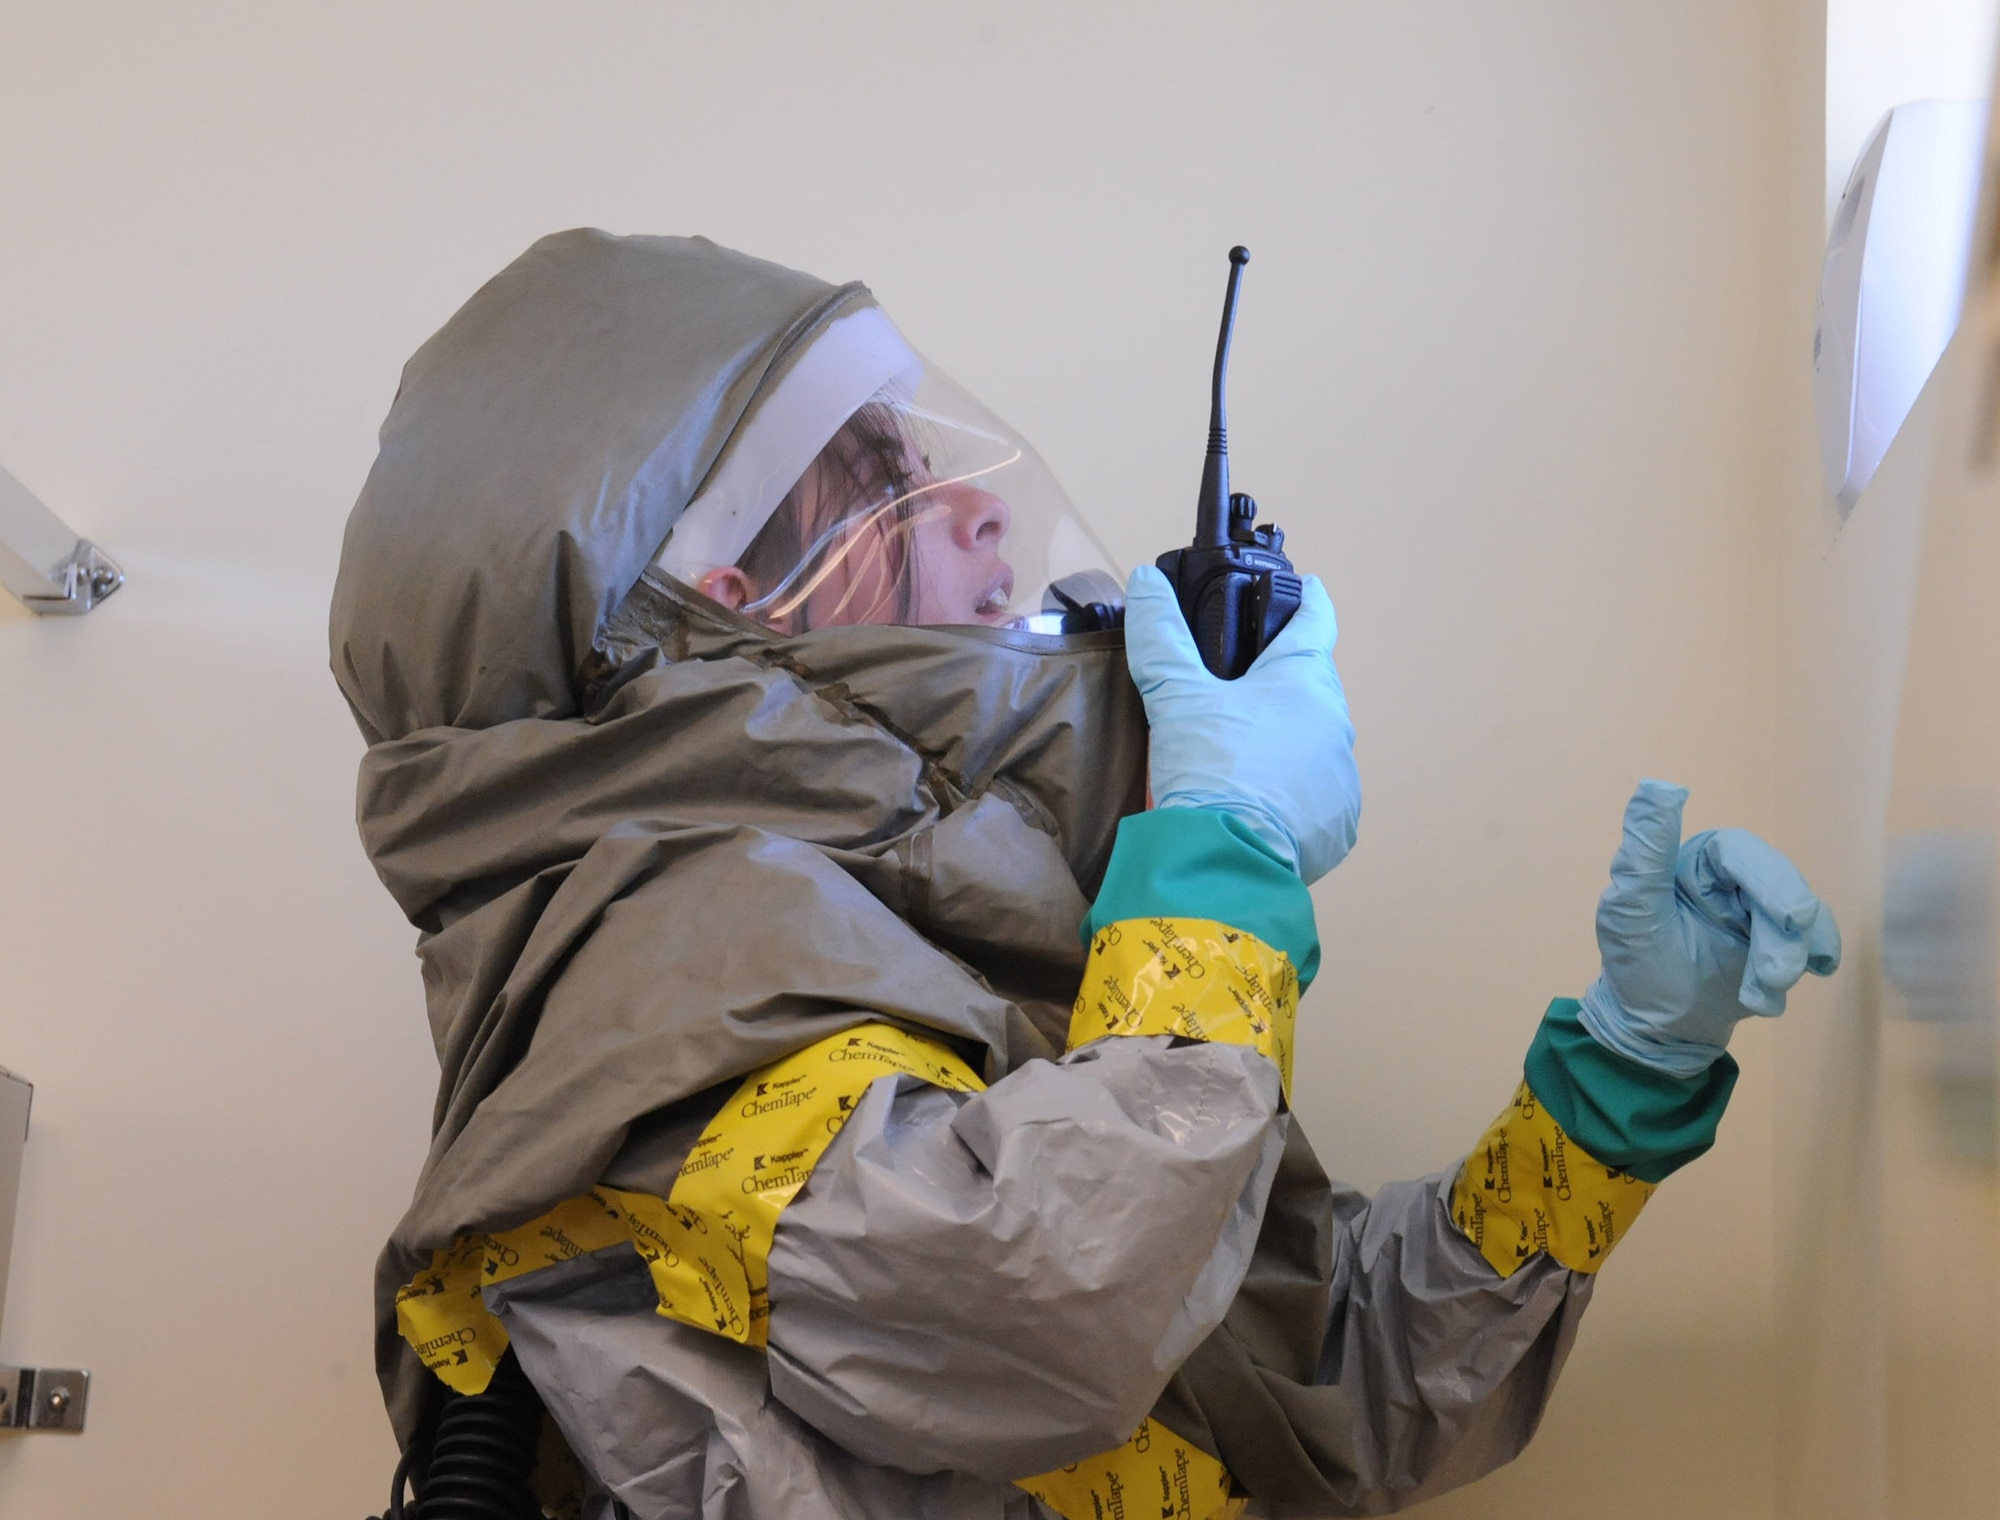 Staff Sgt. Evelyn Nicholson, 4th Medical Group emergency management craftsman, checks an aerospray can for abnormalities during a Chemical Biological Radiological Nuclear Explosive challenge on Seymour Johnson Air Force Base, N.C., March 23, 2010. Nicholson has to check every inch of a room before deeming it clear of hazardous substances. Nicholson is from Bath, N.Y. (U.S. Air Force photo/Senior Airman Whitney Lambert)